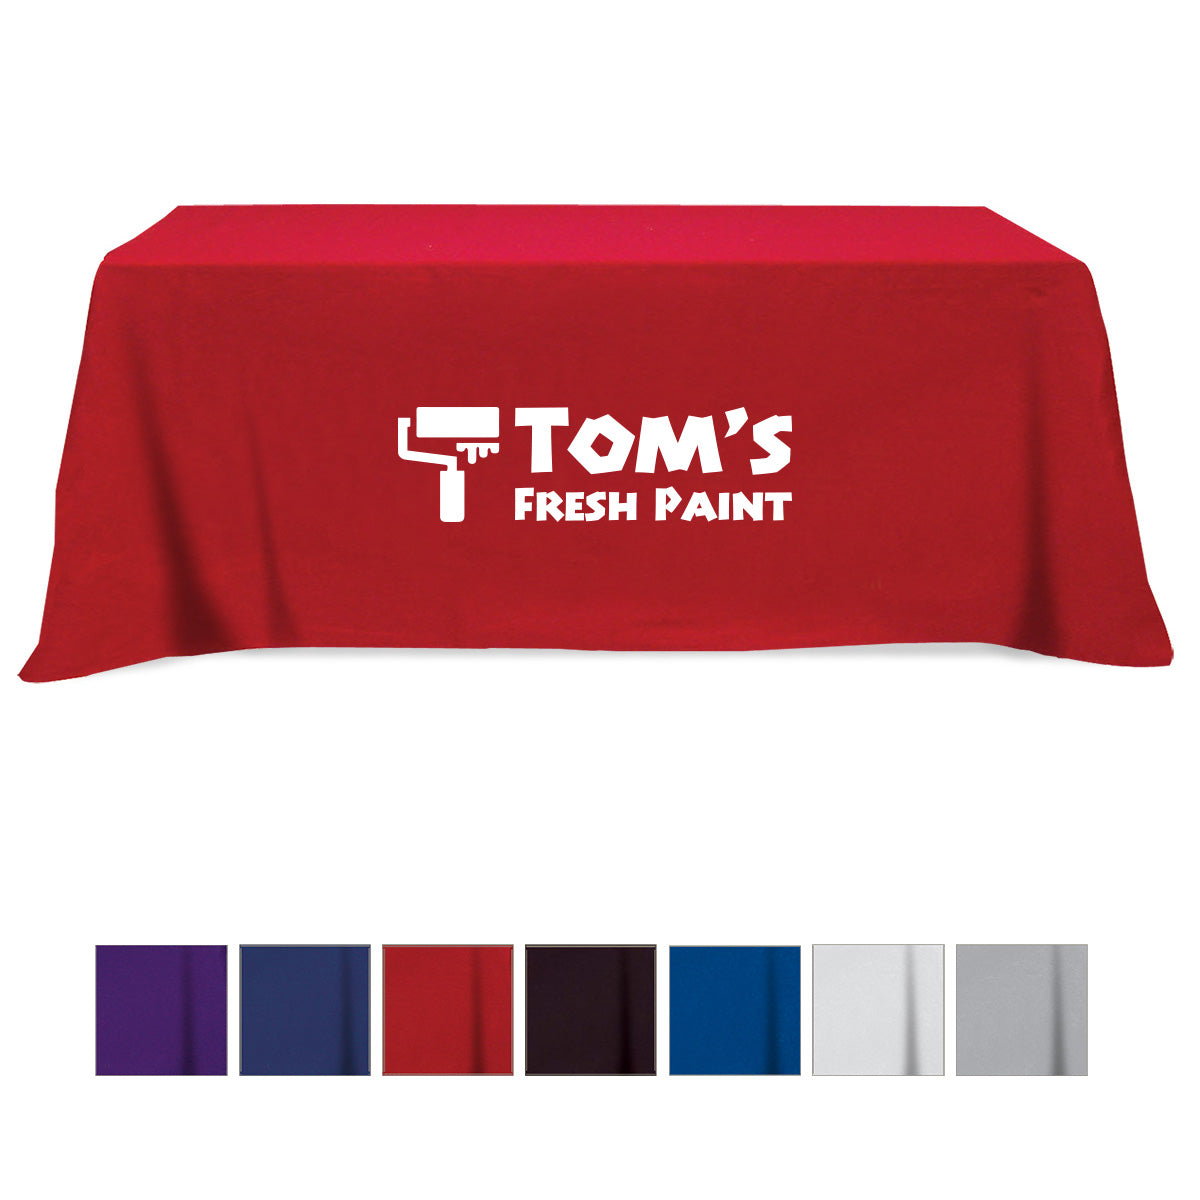 2 Units FLAT POLY/COTTON 3-SIDED TABLE COVER - FITS 8' STANDARD TABLE